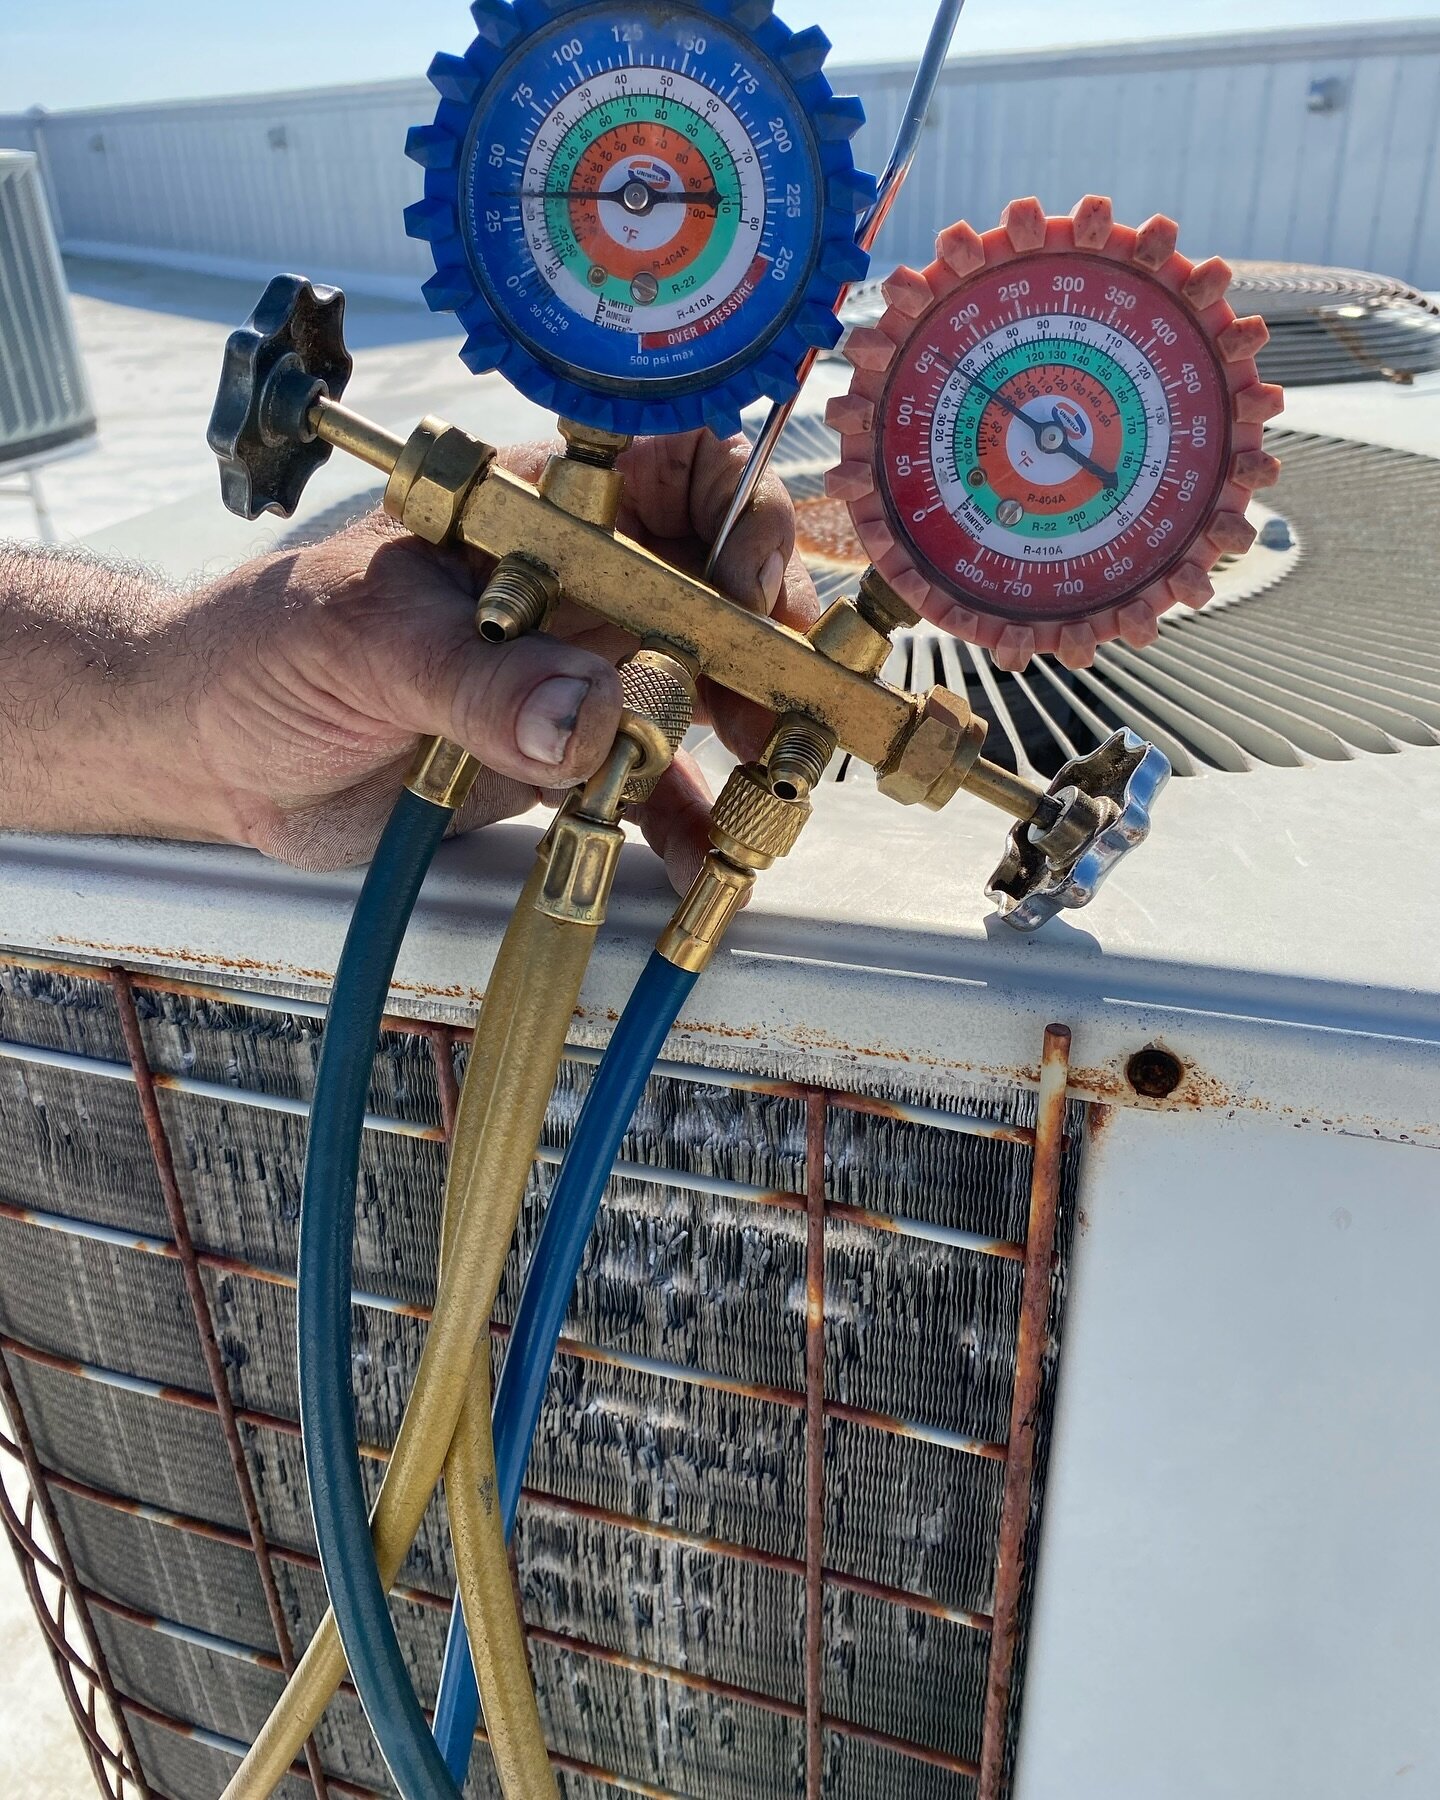 Under pressure, but in control! ⚙️ Our HVAC game is strong with precision readings from top-notch pressure gauges. Keeping your system in check, one measurement at a time. 💨#PressurePerfection #HVACHeroes #GuageMasters #ValueAirandHeat